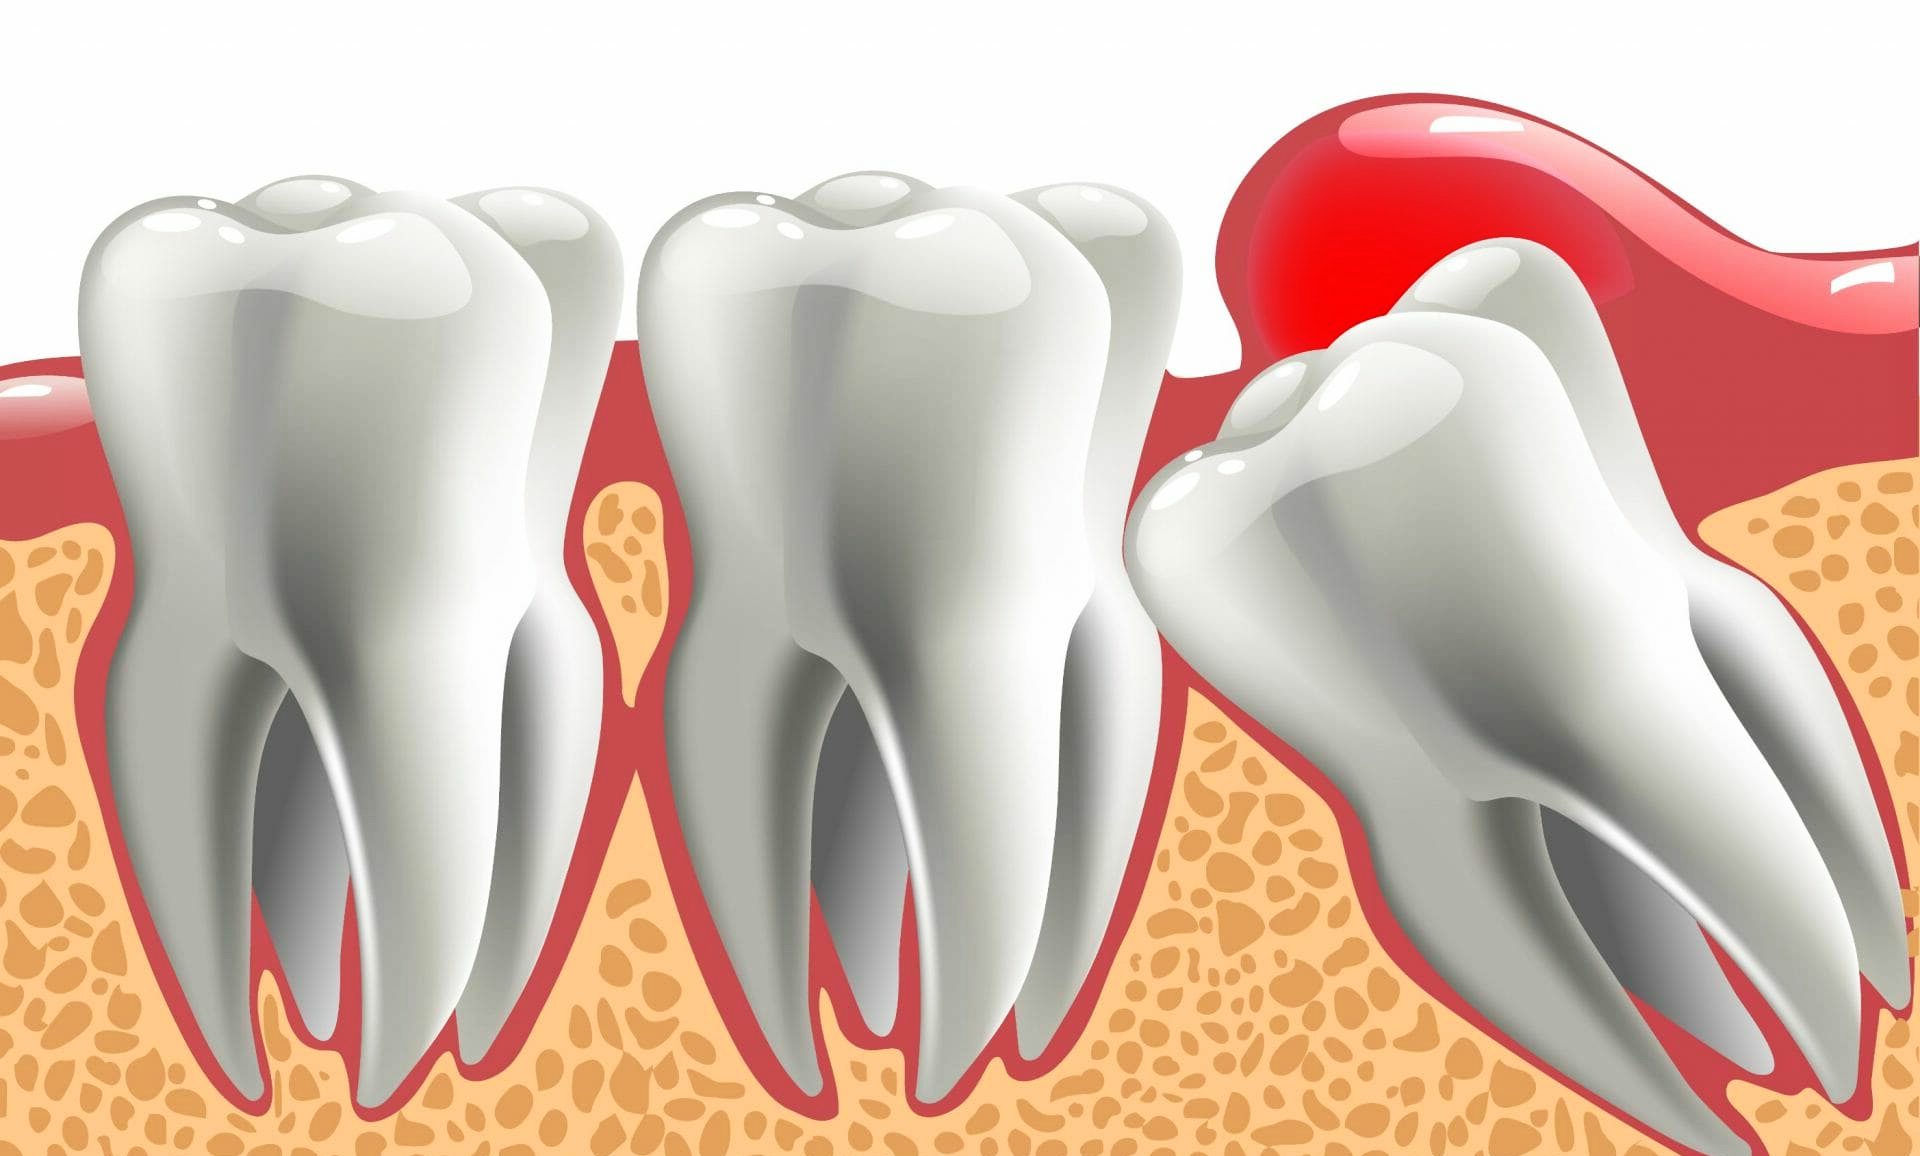 How to get emergency wisdom tooth removal